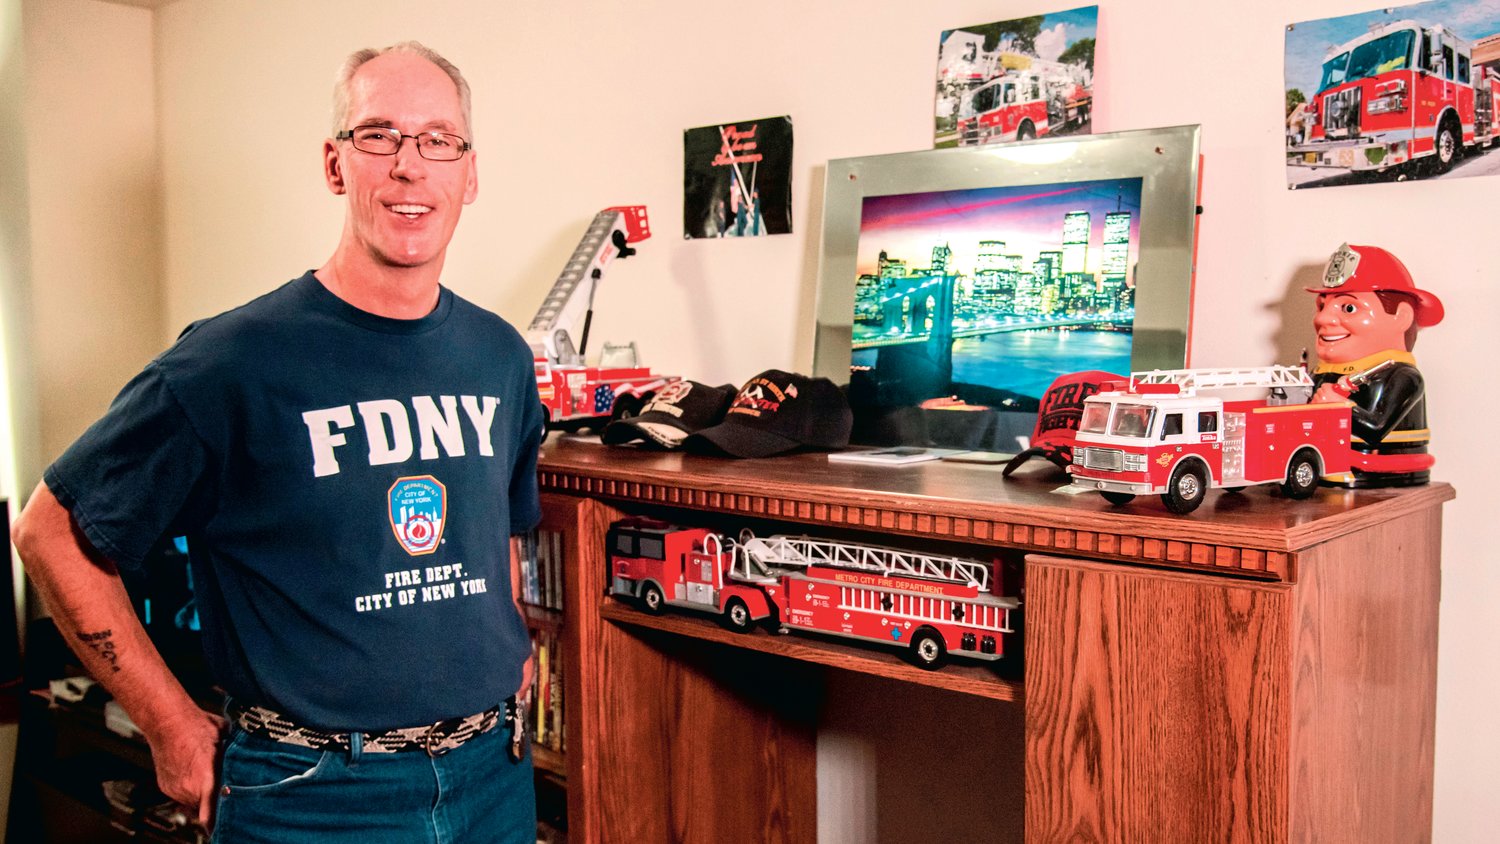 Charles Tippett Jr. smiles and poses for a photo next to a collection of fire hats and engines displayed next to an illuminated photo of the New York City skyline in his Centralia residence. Tippett Jr. sports an “FDNY” shirt he received while working as a firefighter in the city, where he helped victims during the events that unfolded on Sept. 11, 2001. "That's my boys right there," he said Saturday while describing the fire trucks displayed in his living room.